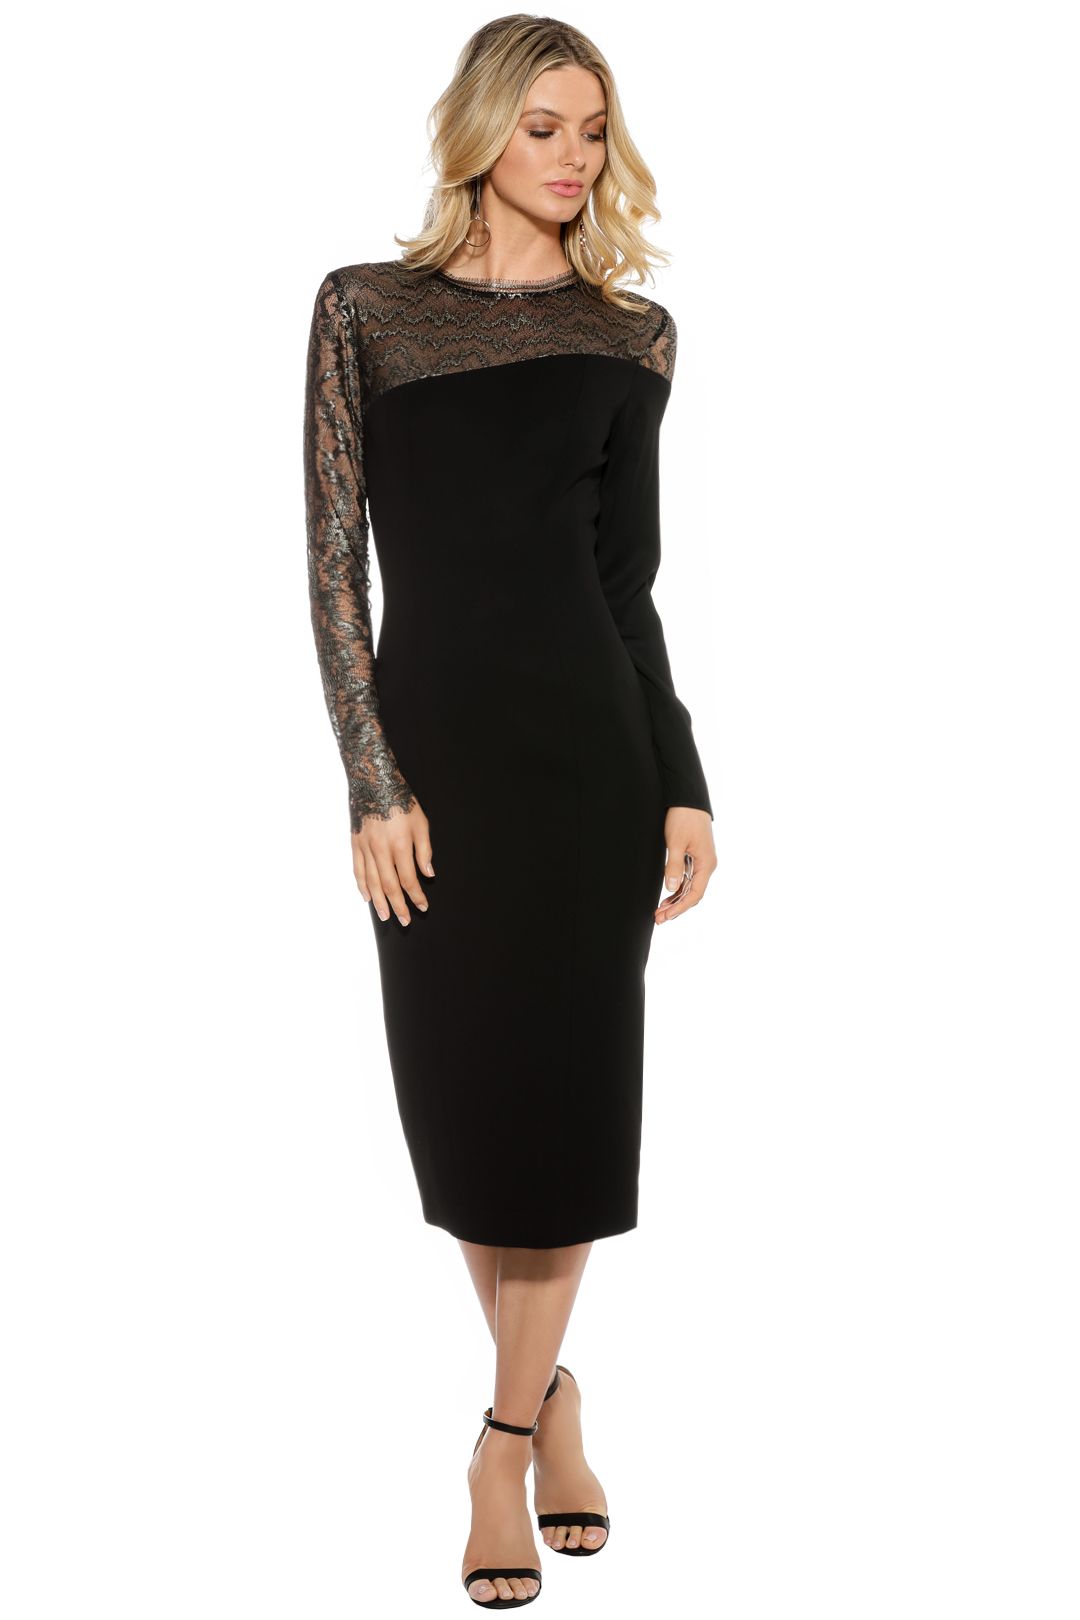 Ginger & Smart - Lace Sleeve Dress - Front